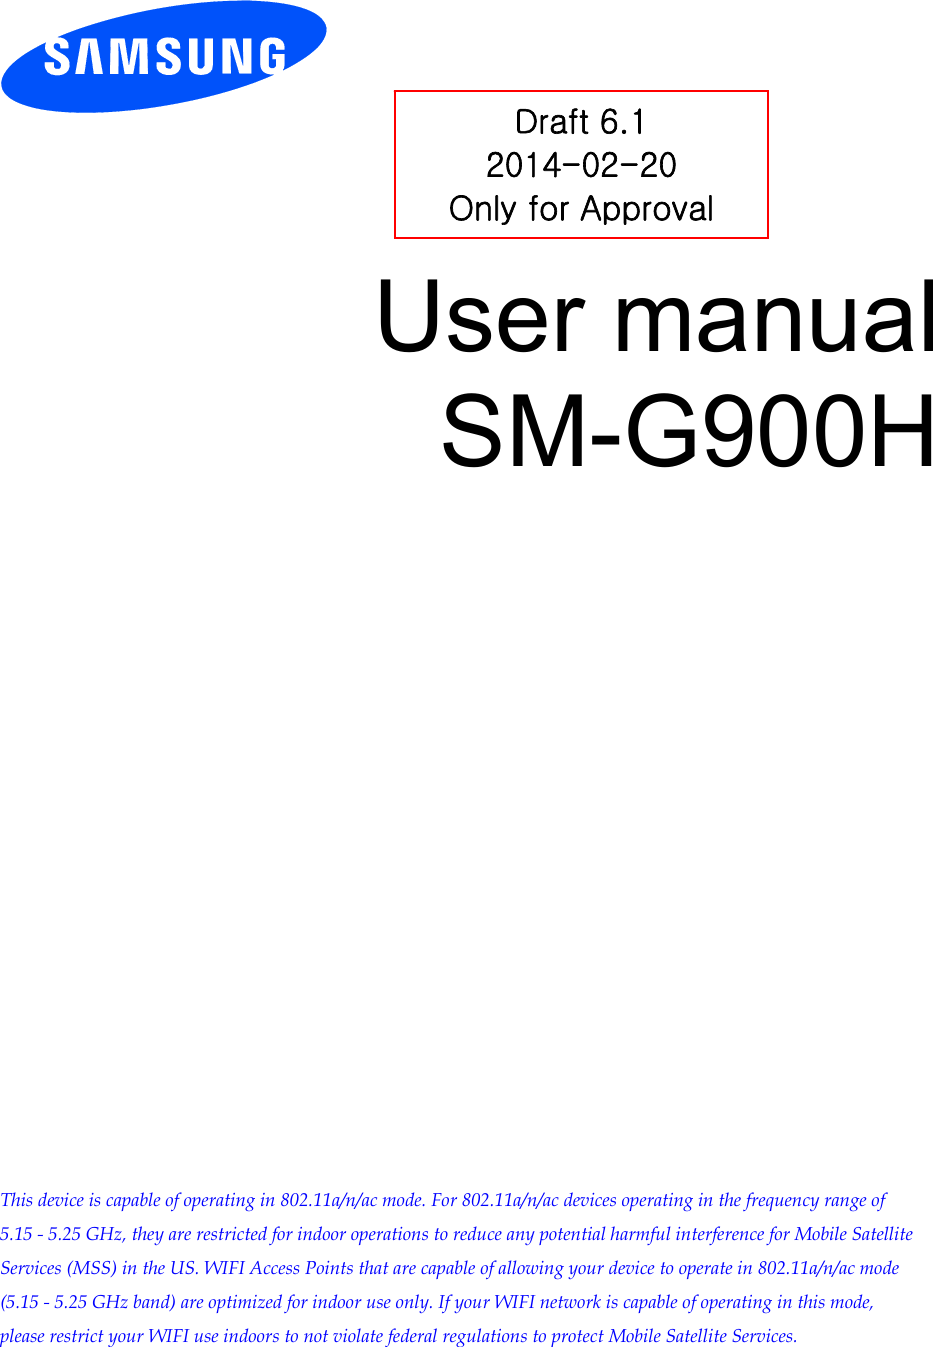 User manual SM-G900H This device is capable of operating in 802.11a/n/ac mode. For 802.11a/n/ac devices operating in the frequency range of 5.15 - 5.25 GHz, they are restricted for indoor operations to reduce any potential harmful interference for Mobile Satellite Services (MSS) in the US. WIFI Access Points that are capable of allowing your device to operate in 802.11a/n/ac mode (5.15 - 5.25 GHz band) are optimized for indoor use only. If your WIFI network is capable of operating in this mode, please restrict your WIFI use indoors to not violate federal regulations to protect Mobile Satellite Services.Draft 6.1 2014-02-20 Only for Approval 